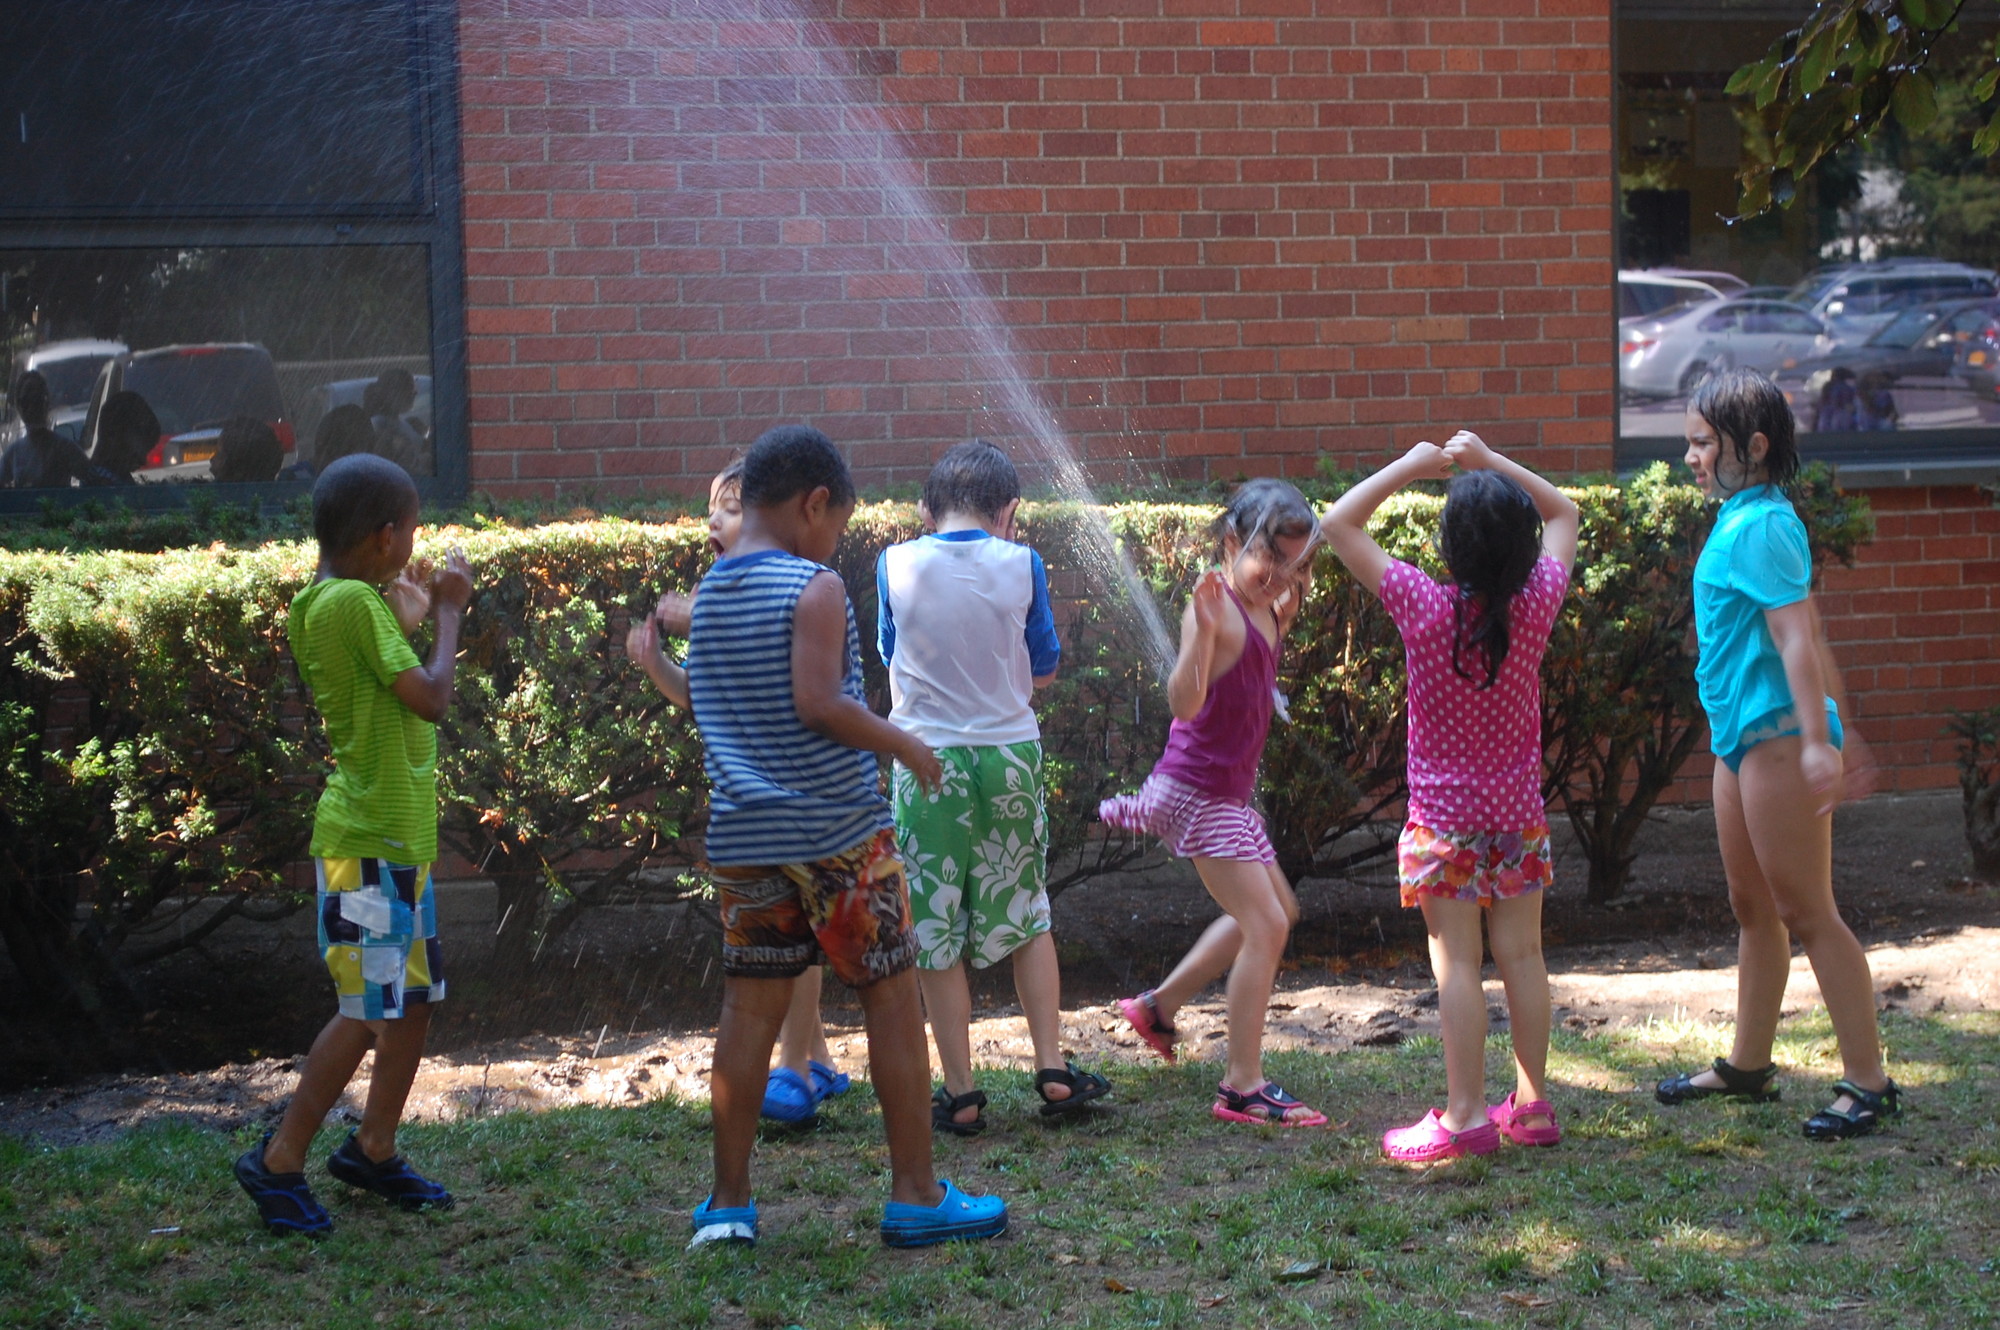 On a hot July day, the sprinkler provided much needed refreshment.